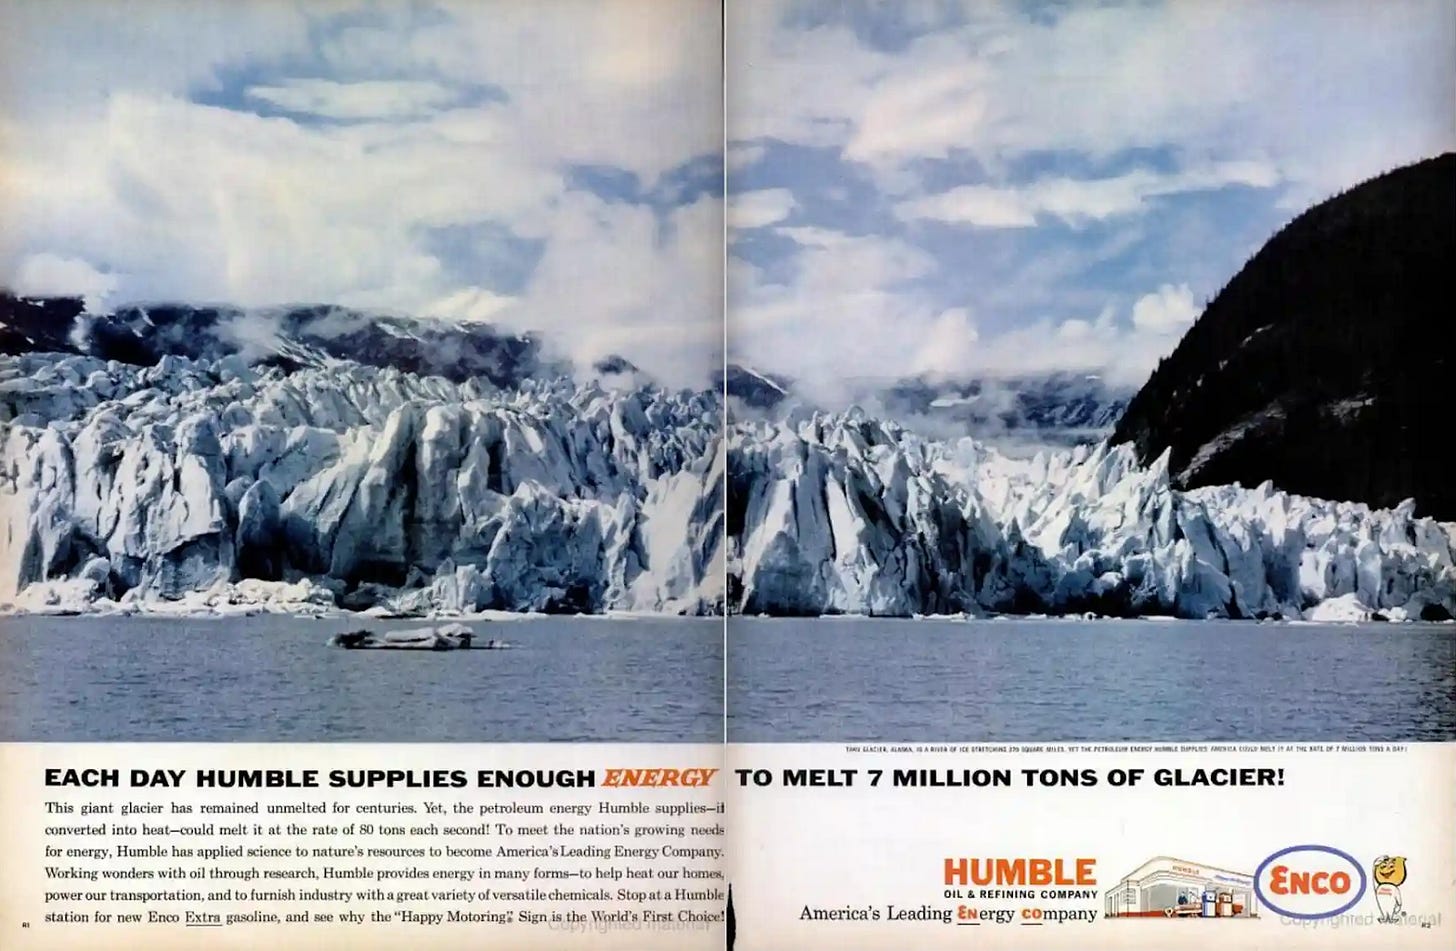 An early advert from Humble Oil, boasting that each day's energy is enough to melt 7 million tons of glacier.